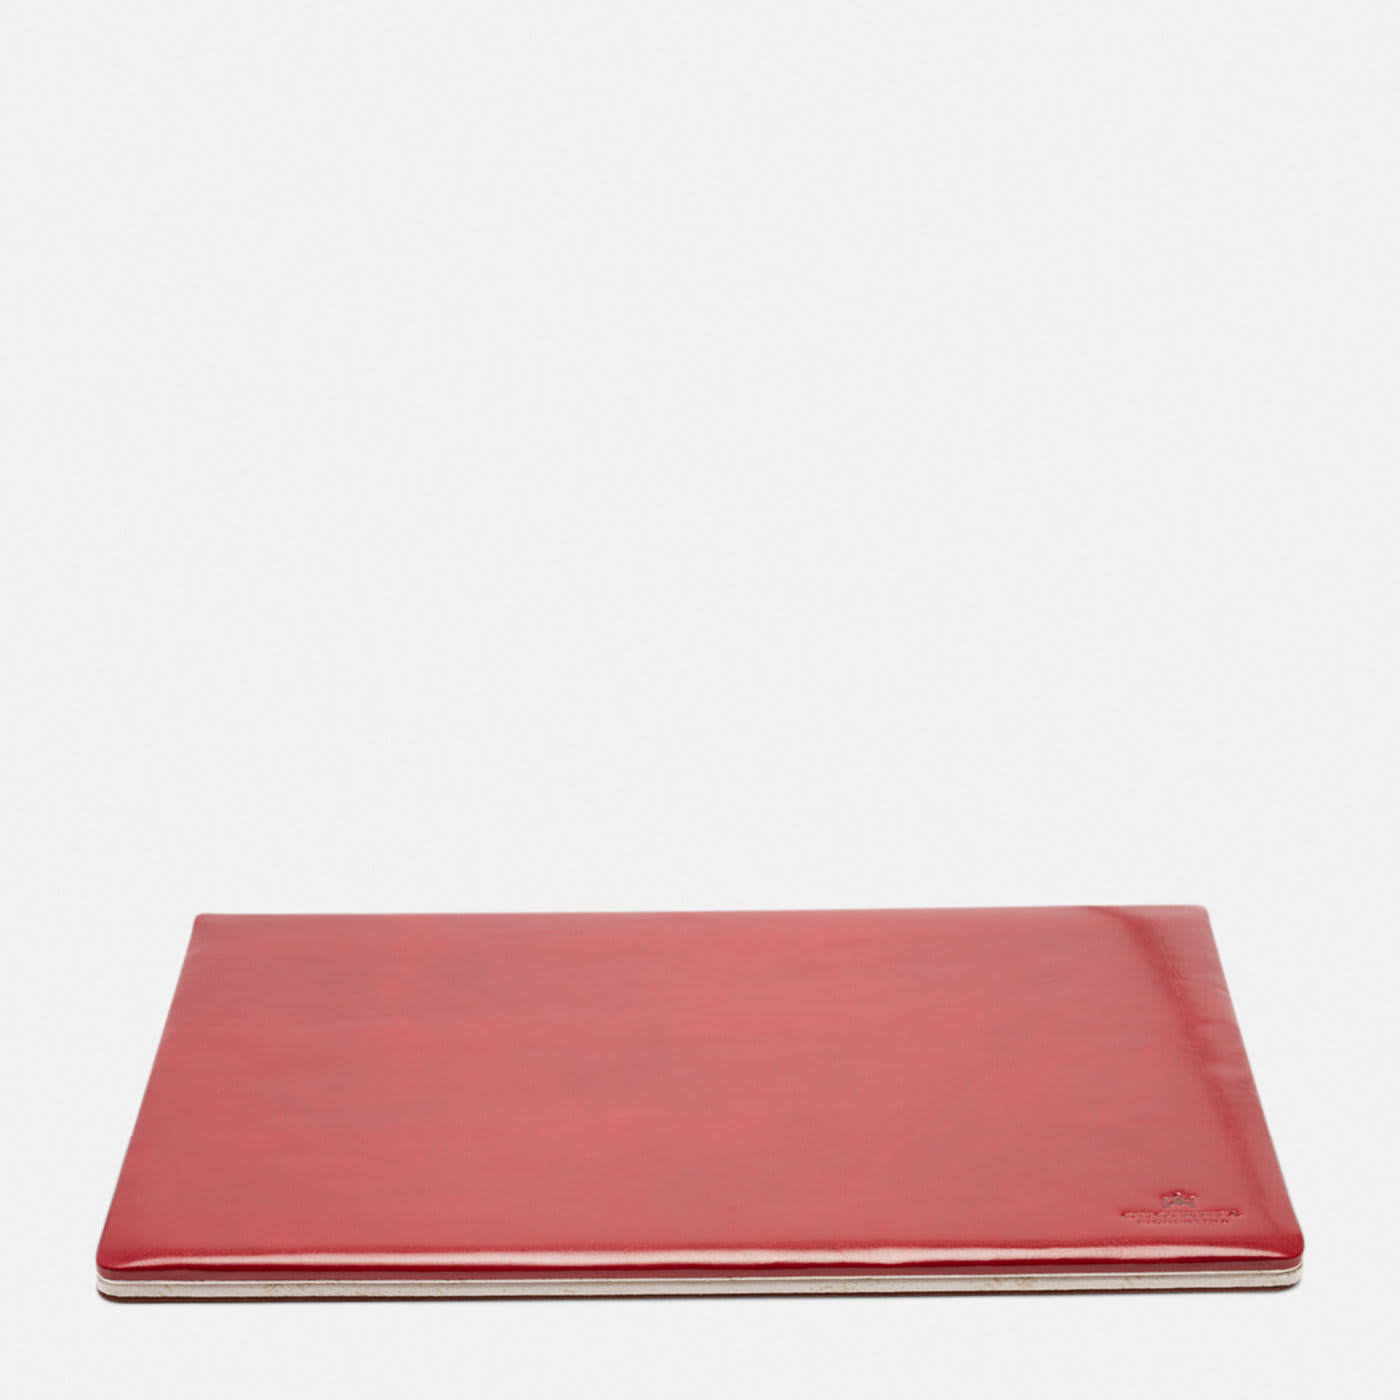 Warm & Color Red Set of Desk Pad, Pen and Letter Holder - Cuoieria Fiorentina